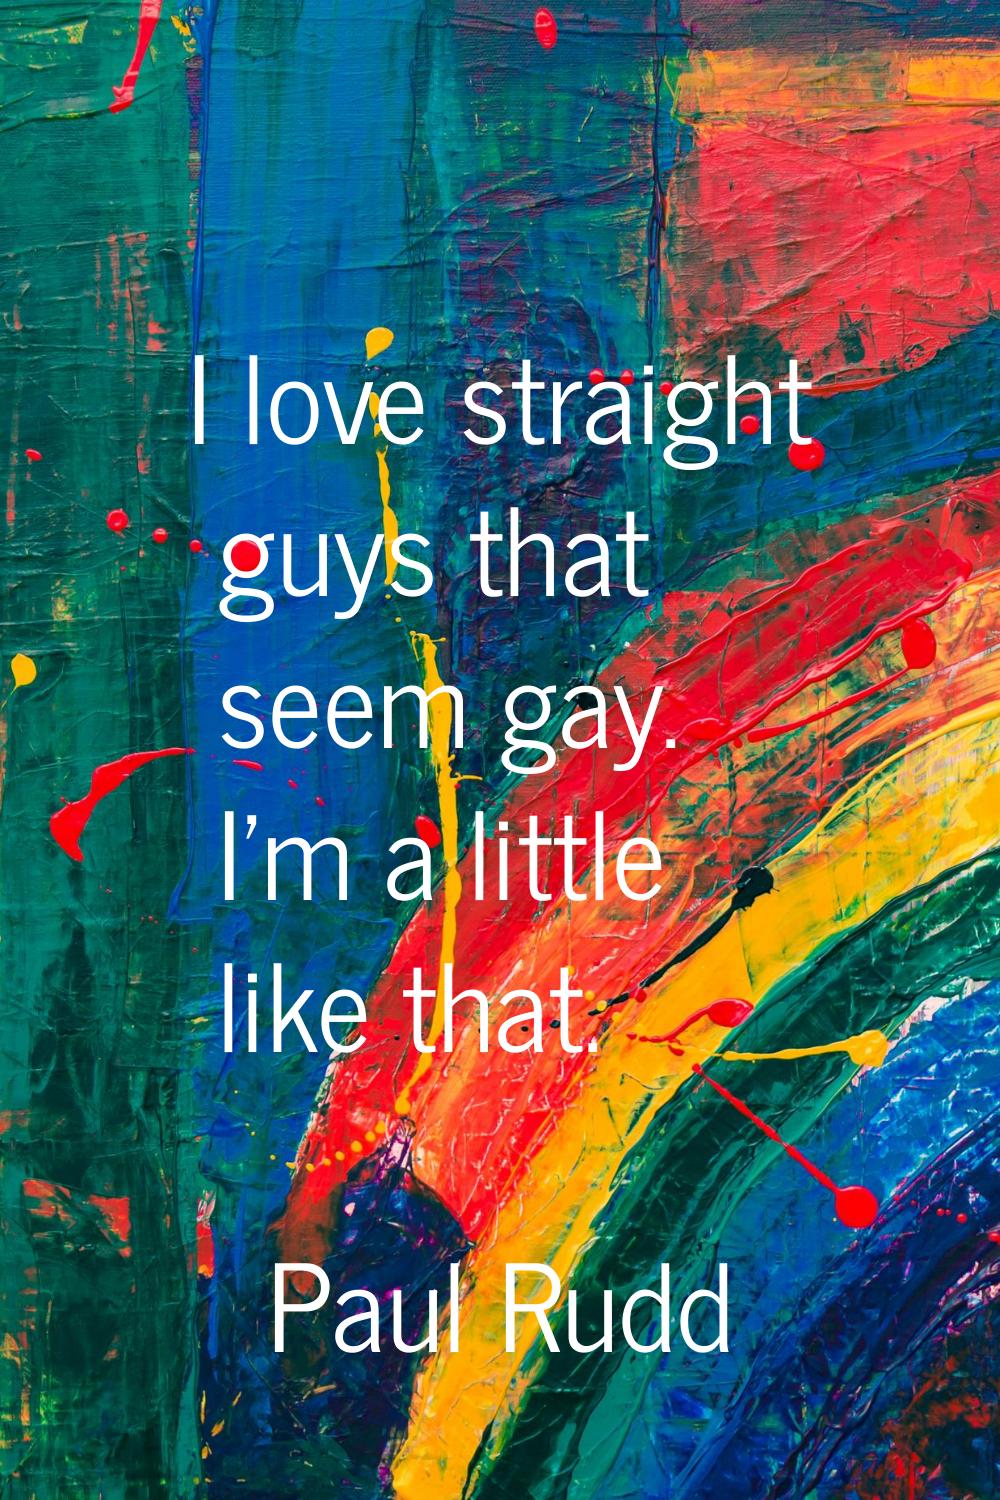 I love straight guys that seem gay. I'm a little like that.